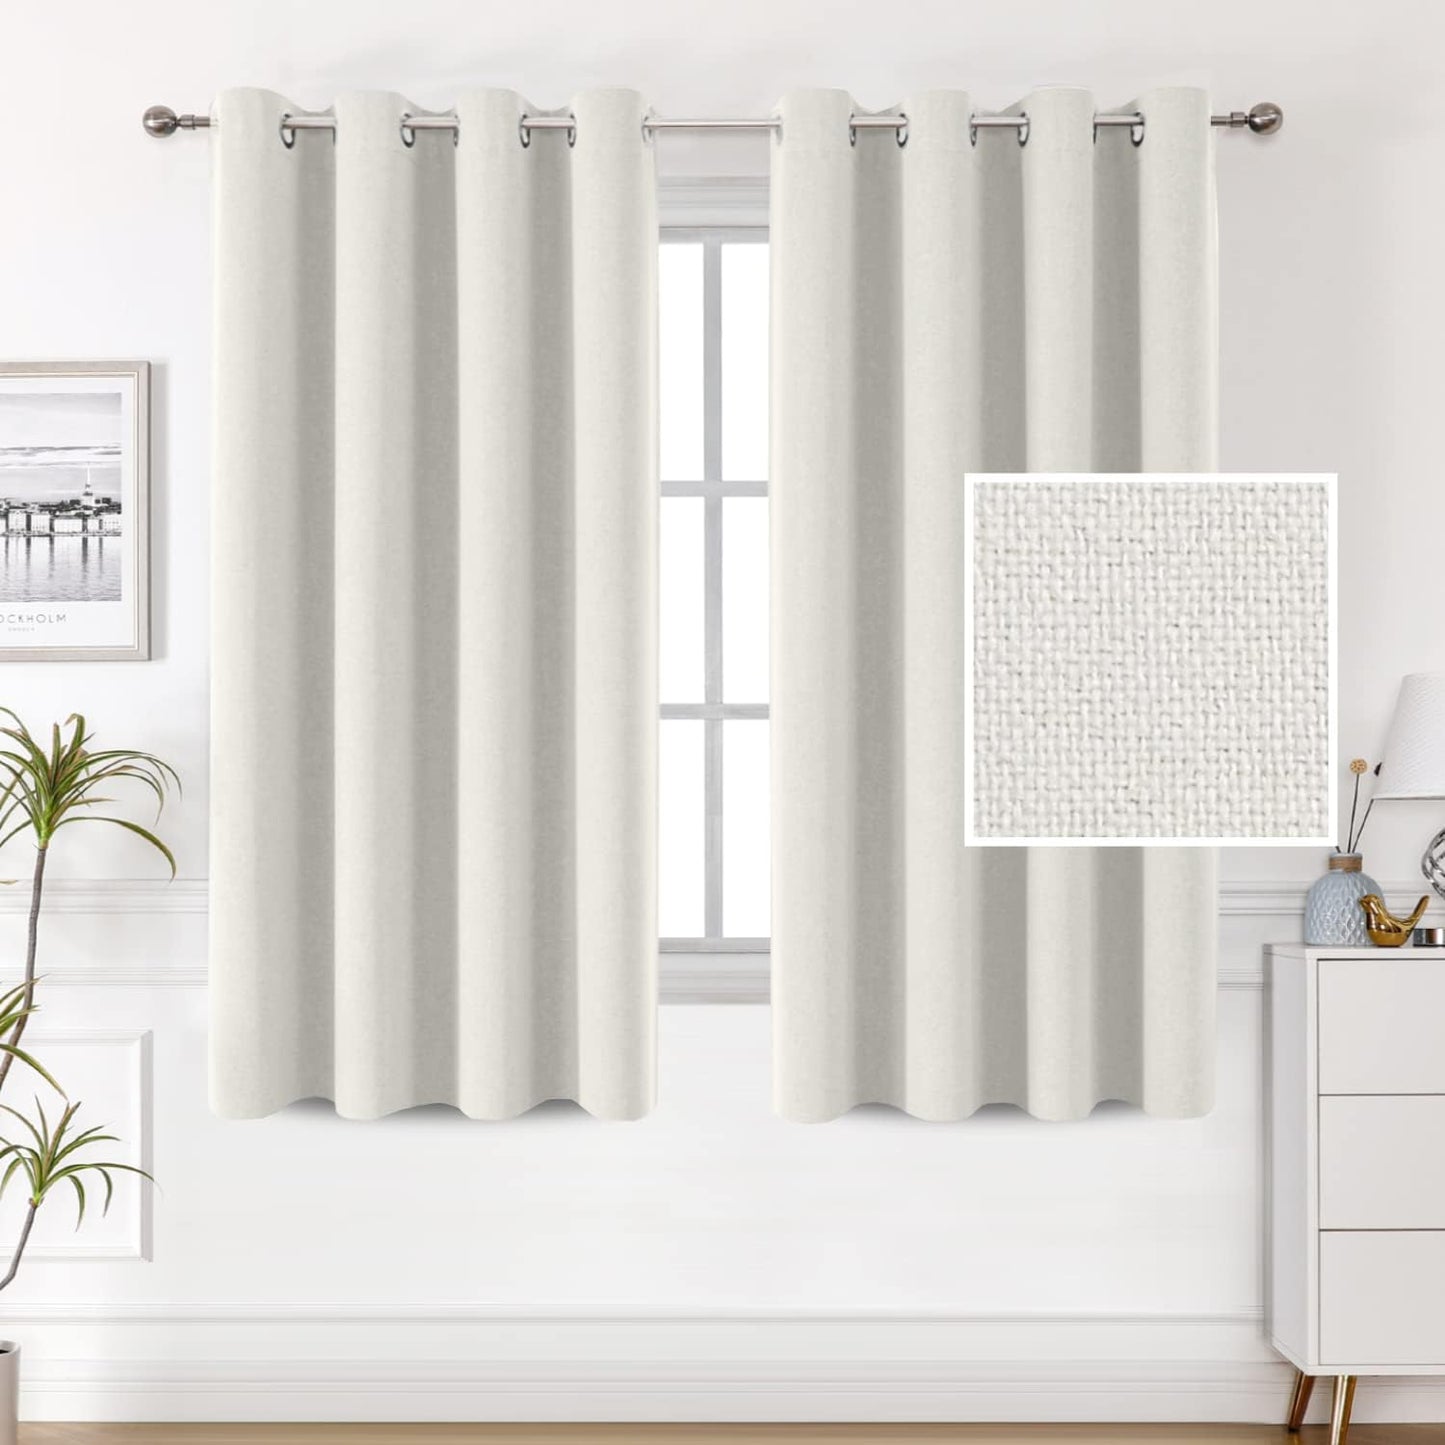 H.VERSAILTEX 100% Blackout Linen Look Curtains Thermal Insulated Curtains for Living Room Textured Burlap Drapes for Bedroom Grommet Linen Noise Blocking Curtains 42 X 84 Inch, 2 Panels - Sage  H.VERSAILTEX Off White 52"W X 54"L 